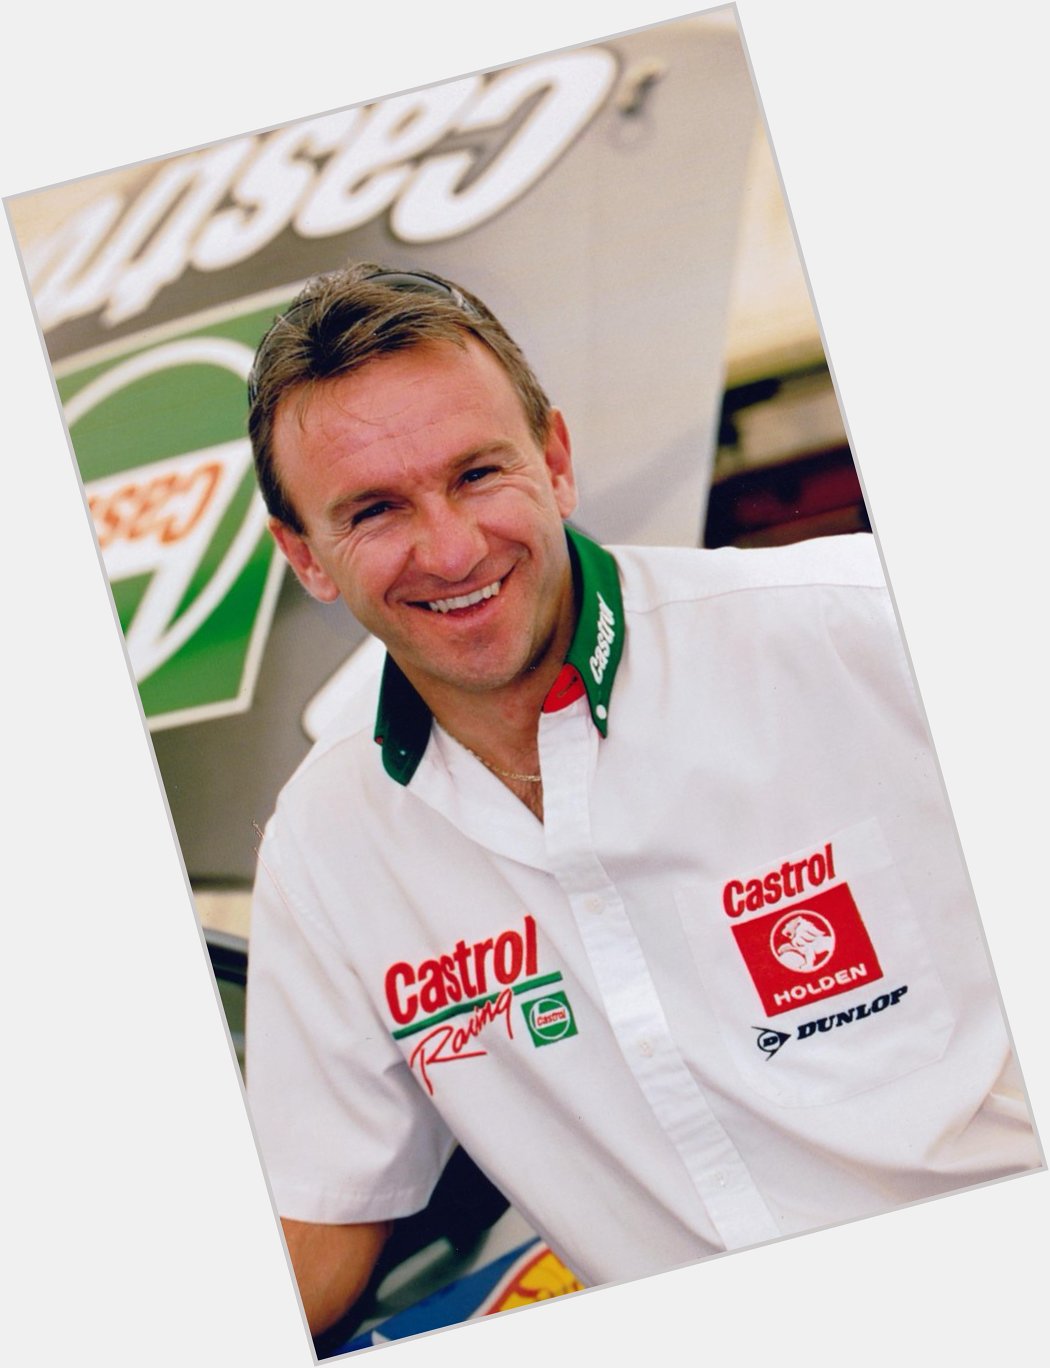  wishes Castrol V8 legend, Russell Ingall a very happy birthday today! 